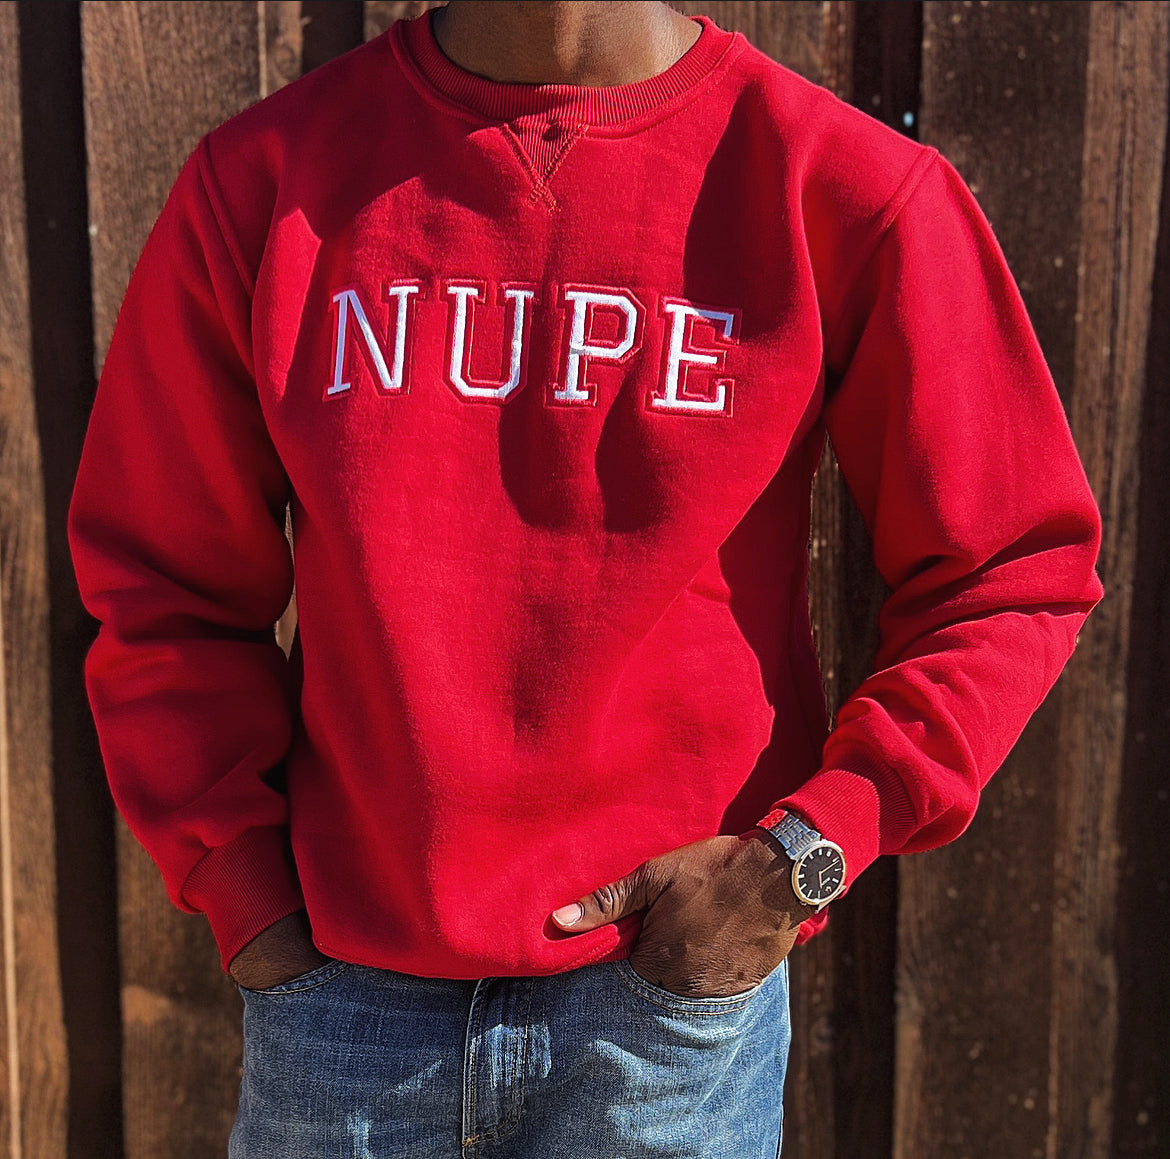 Exclusive Kappa Alpha Psi Stitched Embroidery unique Hoodie. This is the perfect long-sleeved hoodie to wear while showing off your Kappa Alpha Psi fraternity lettering. A comfortable 100% cotton  with a twill Greek letters embroidery across the chest give you the perfect fit. This hoodie is also a perfect gift or your favorite Kappa Man.